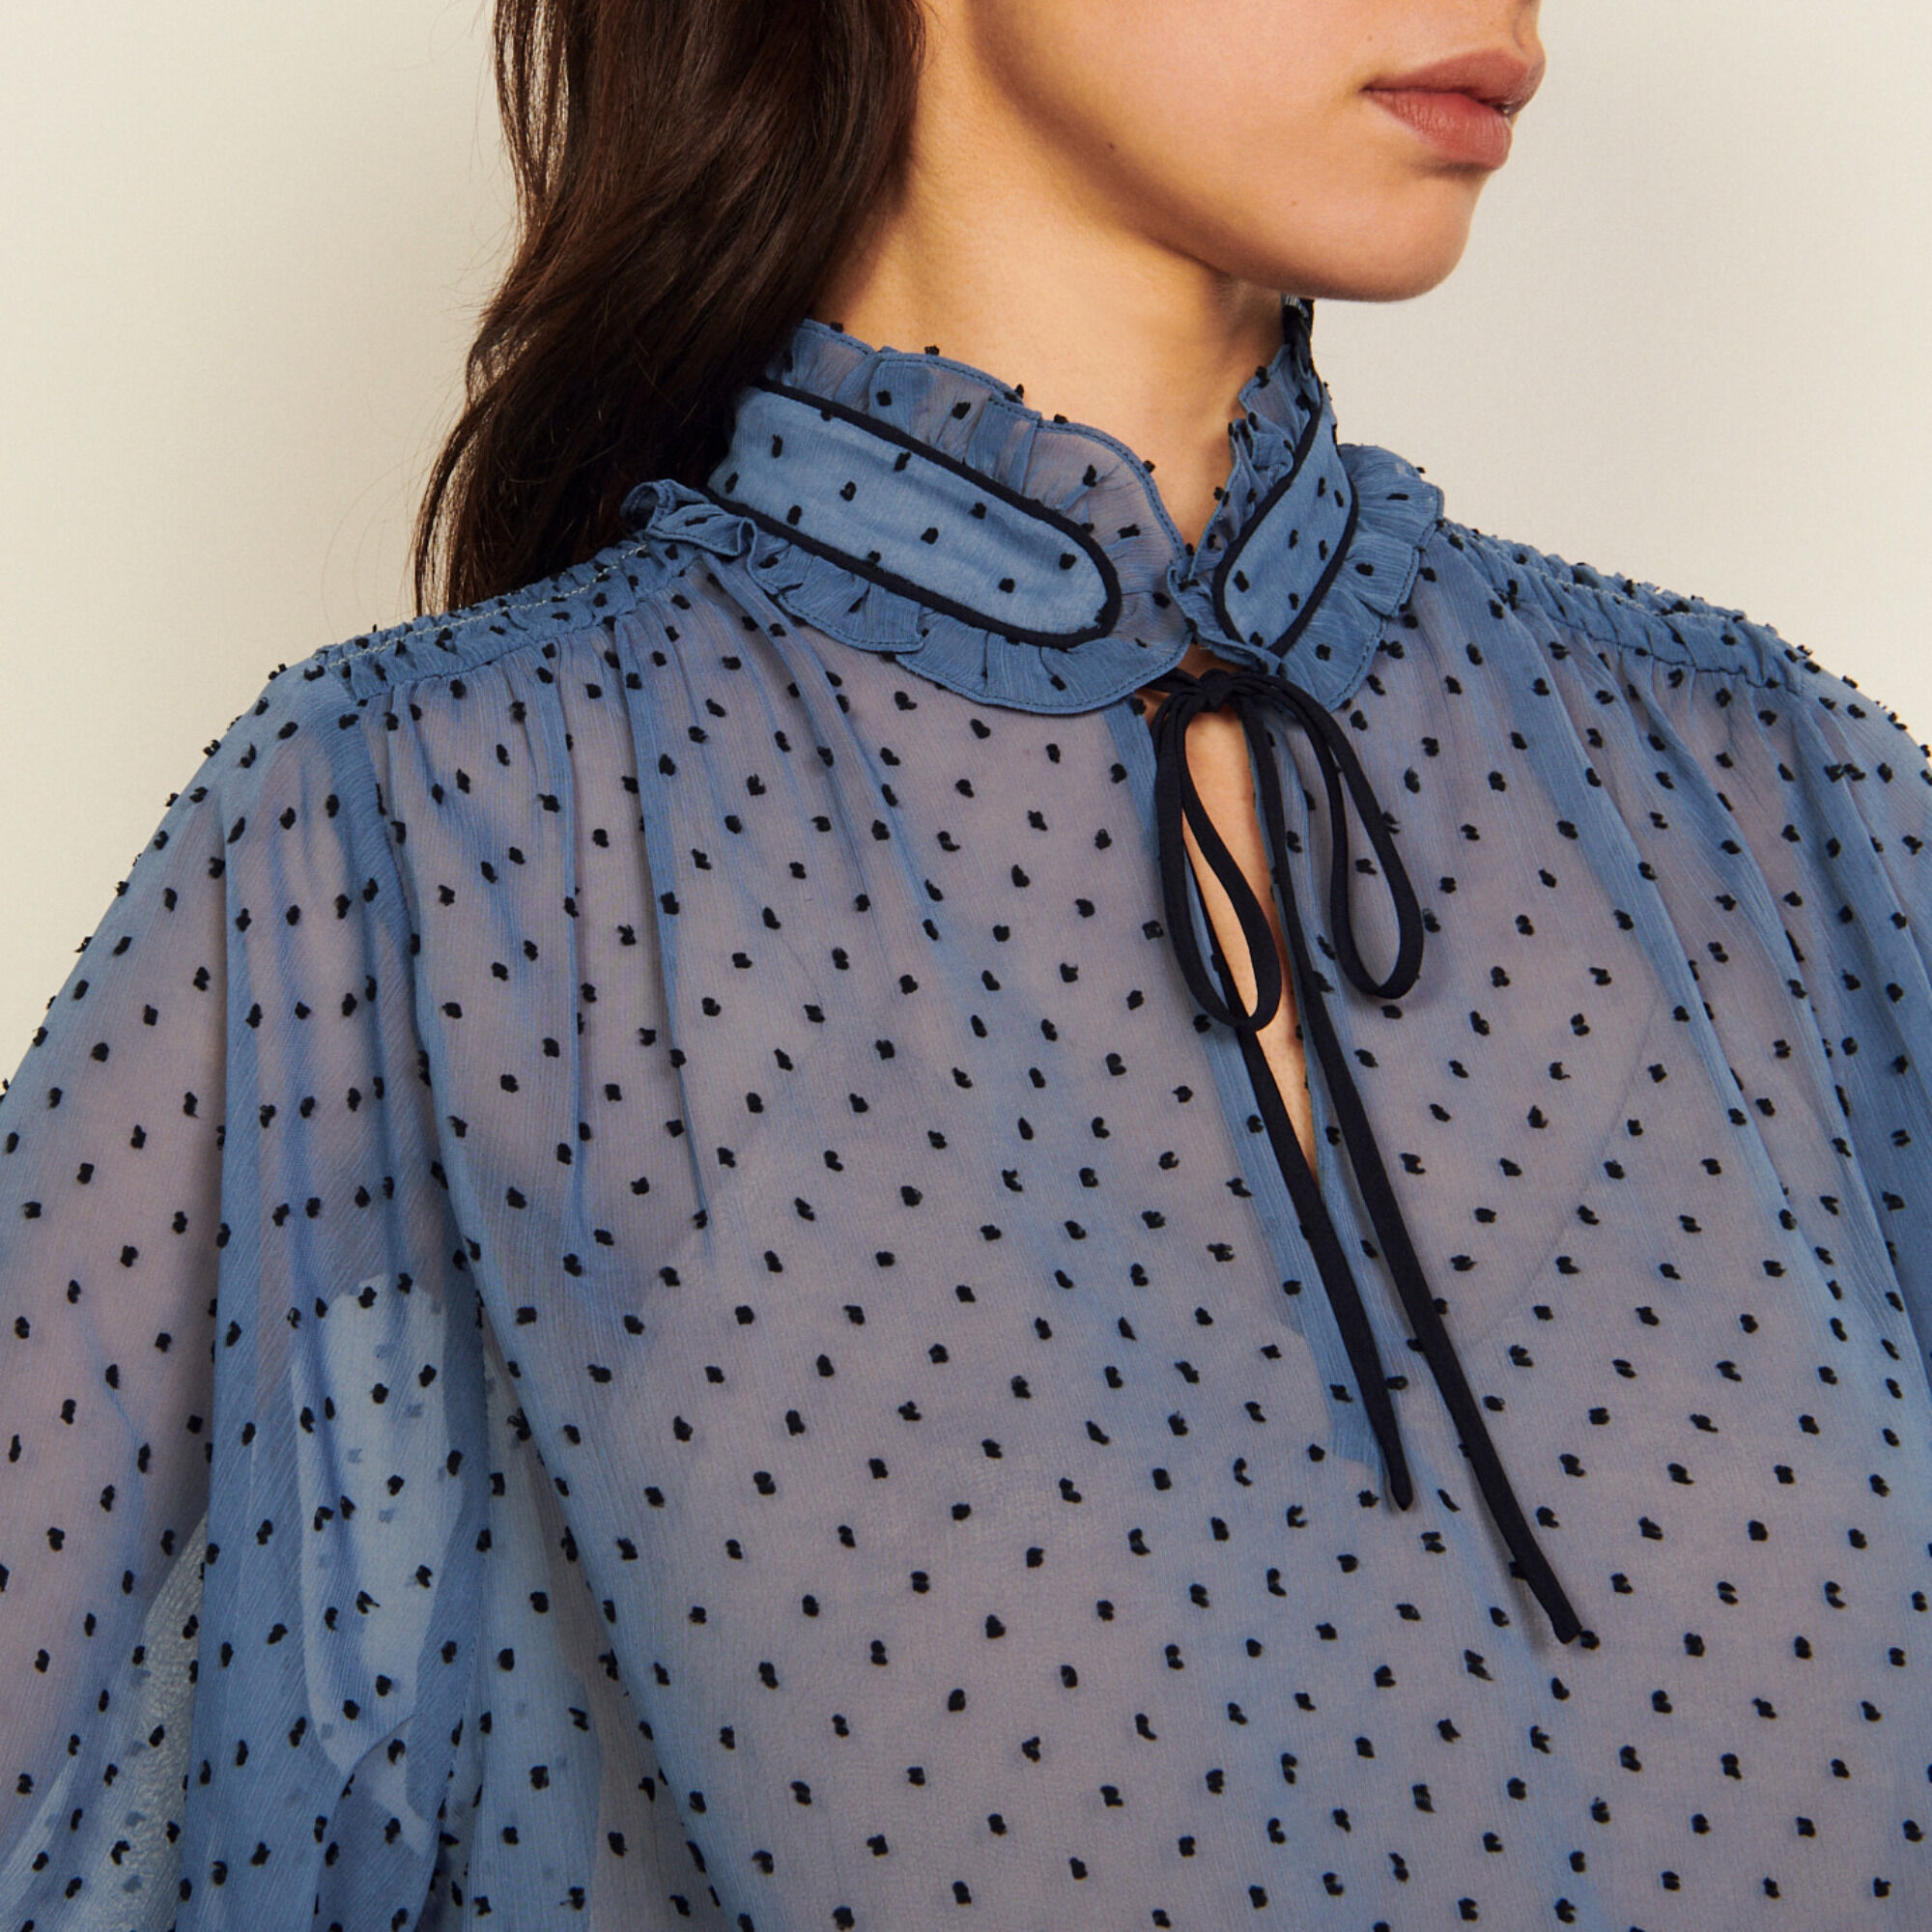 Dotted Swiss high-neck top Select a size and Login to add to Wish list